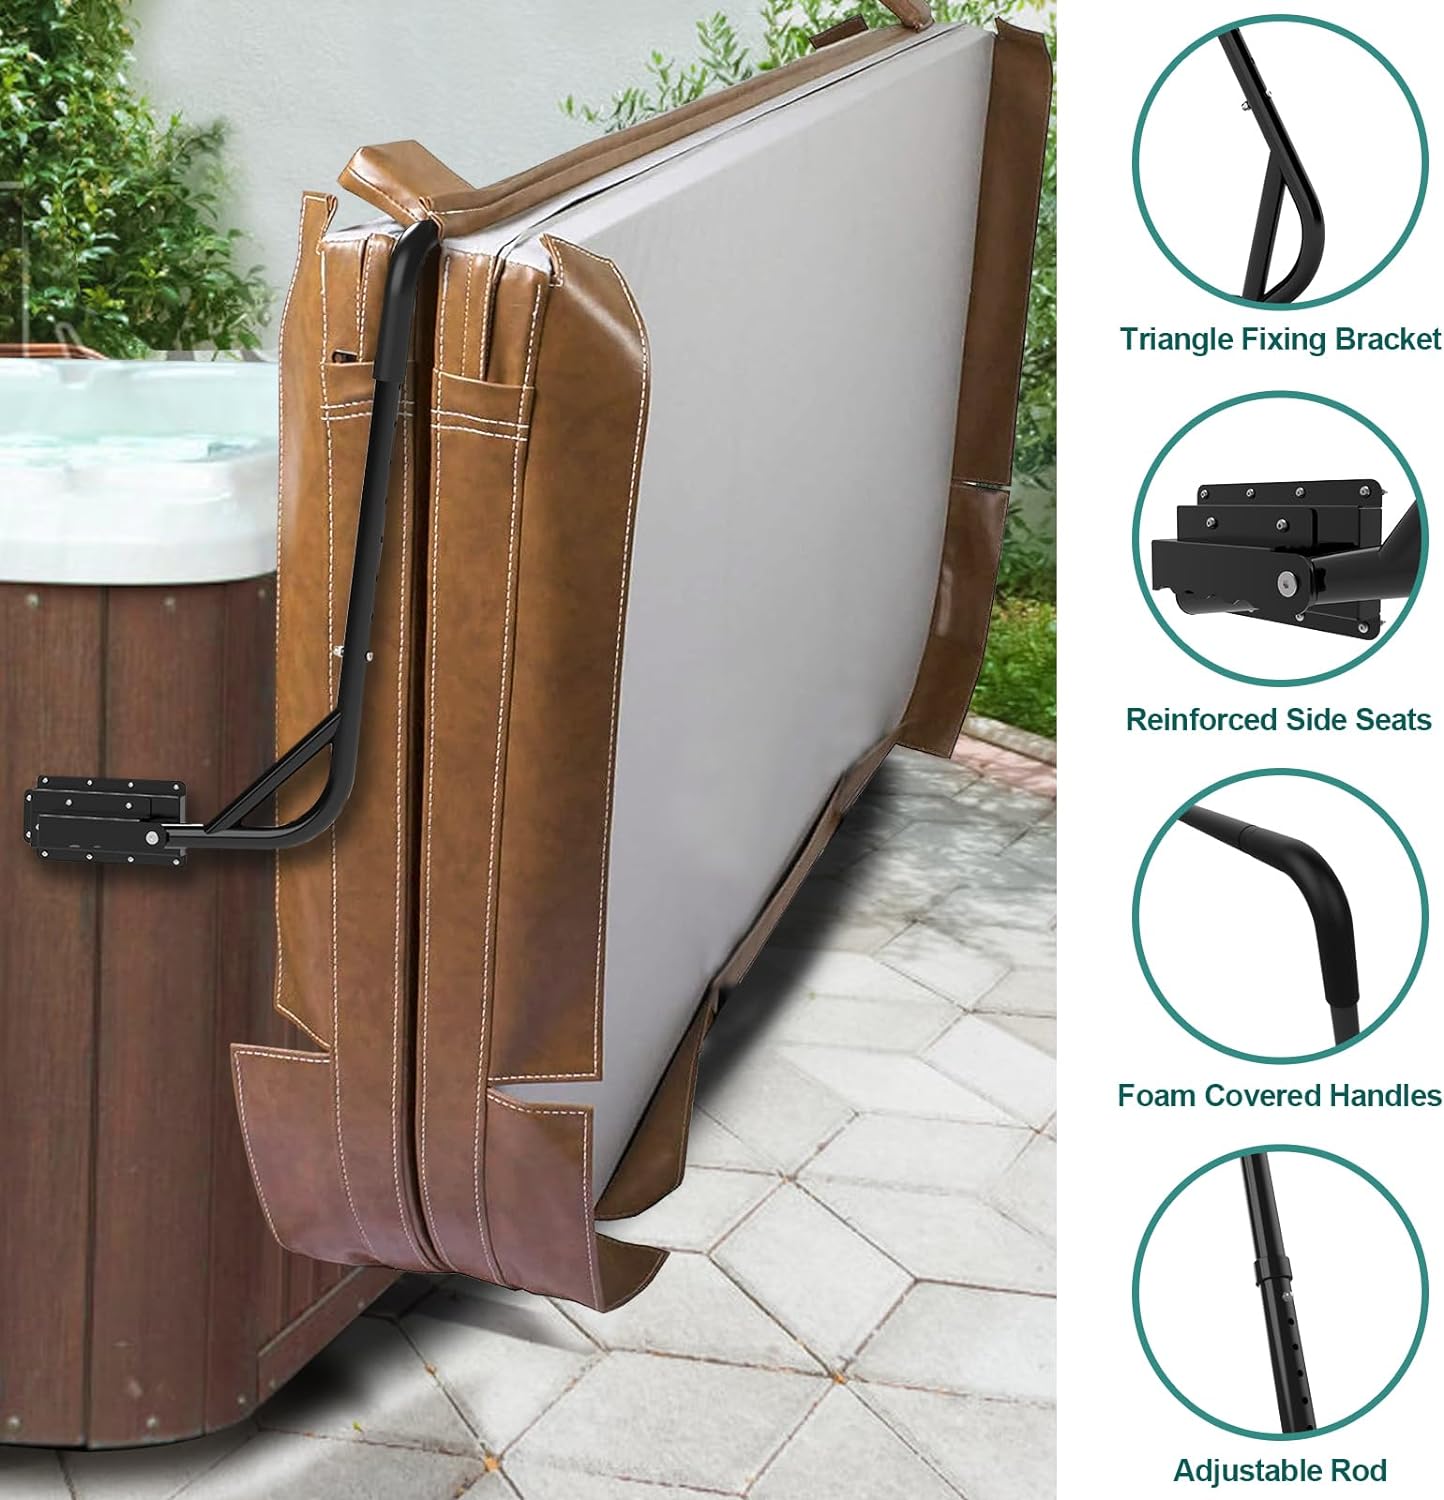 Tocretoare Spa Cover Lifts, Hot Tub Cover Lift & Pivot Top Mount Spa Removal System Reinforced Bracket, Hydraulic Hot Tub